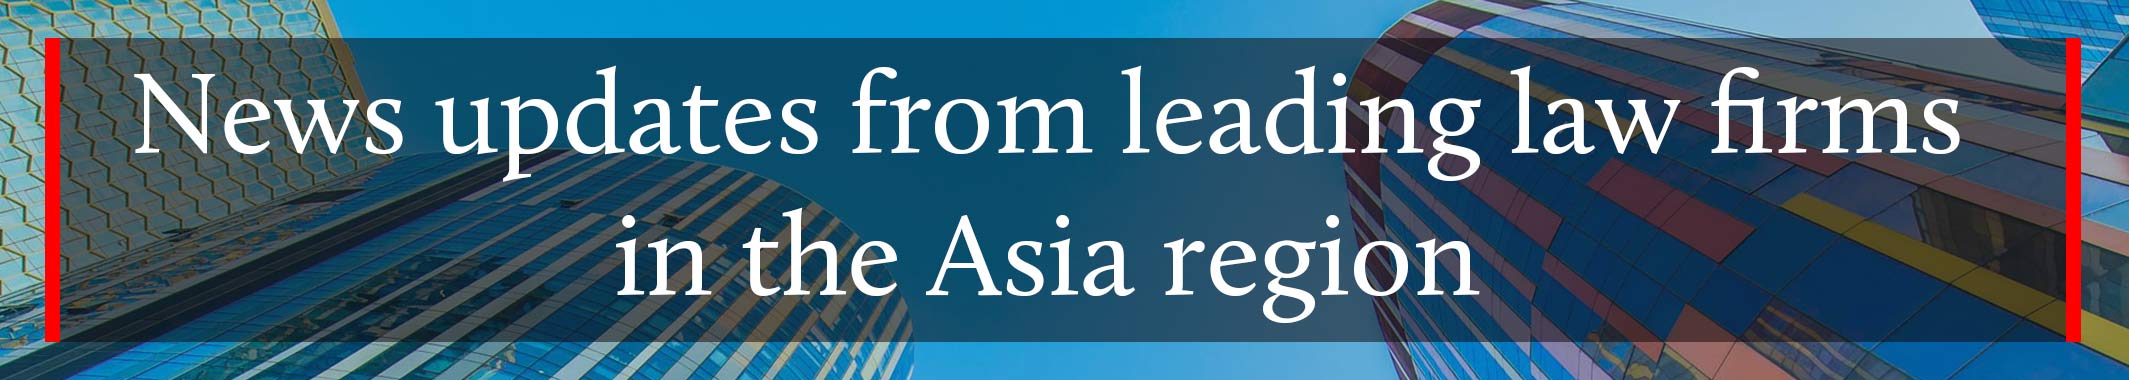 Legal-News-Updates-from-Leading-Law-Firms-in-Asia